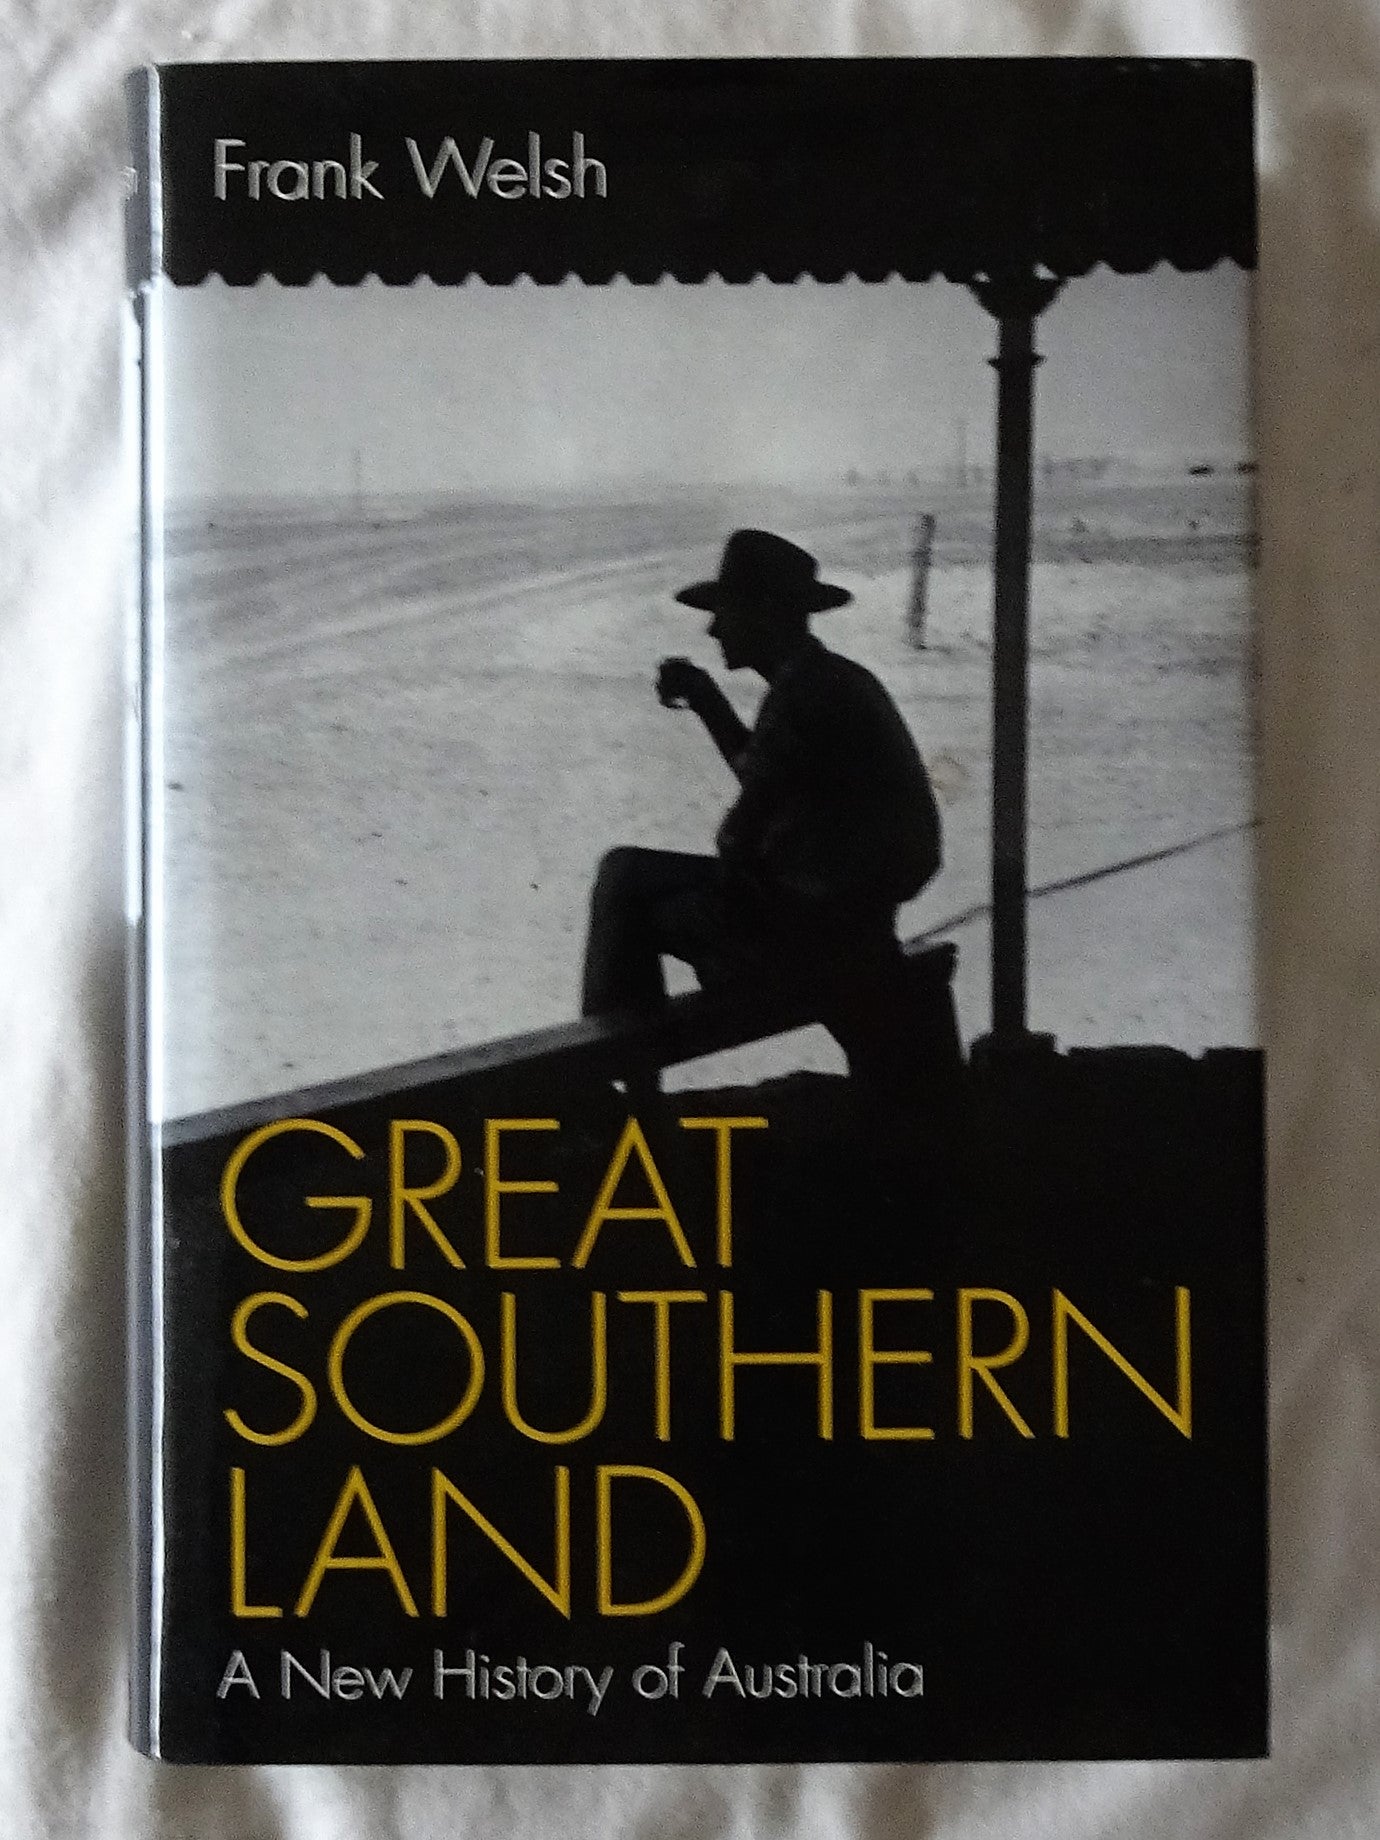 Great Southern Land by Frank Welsh